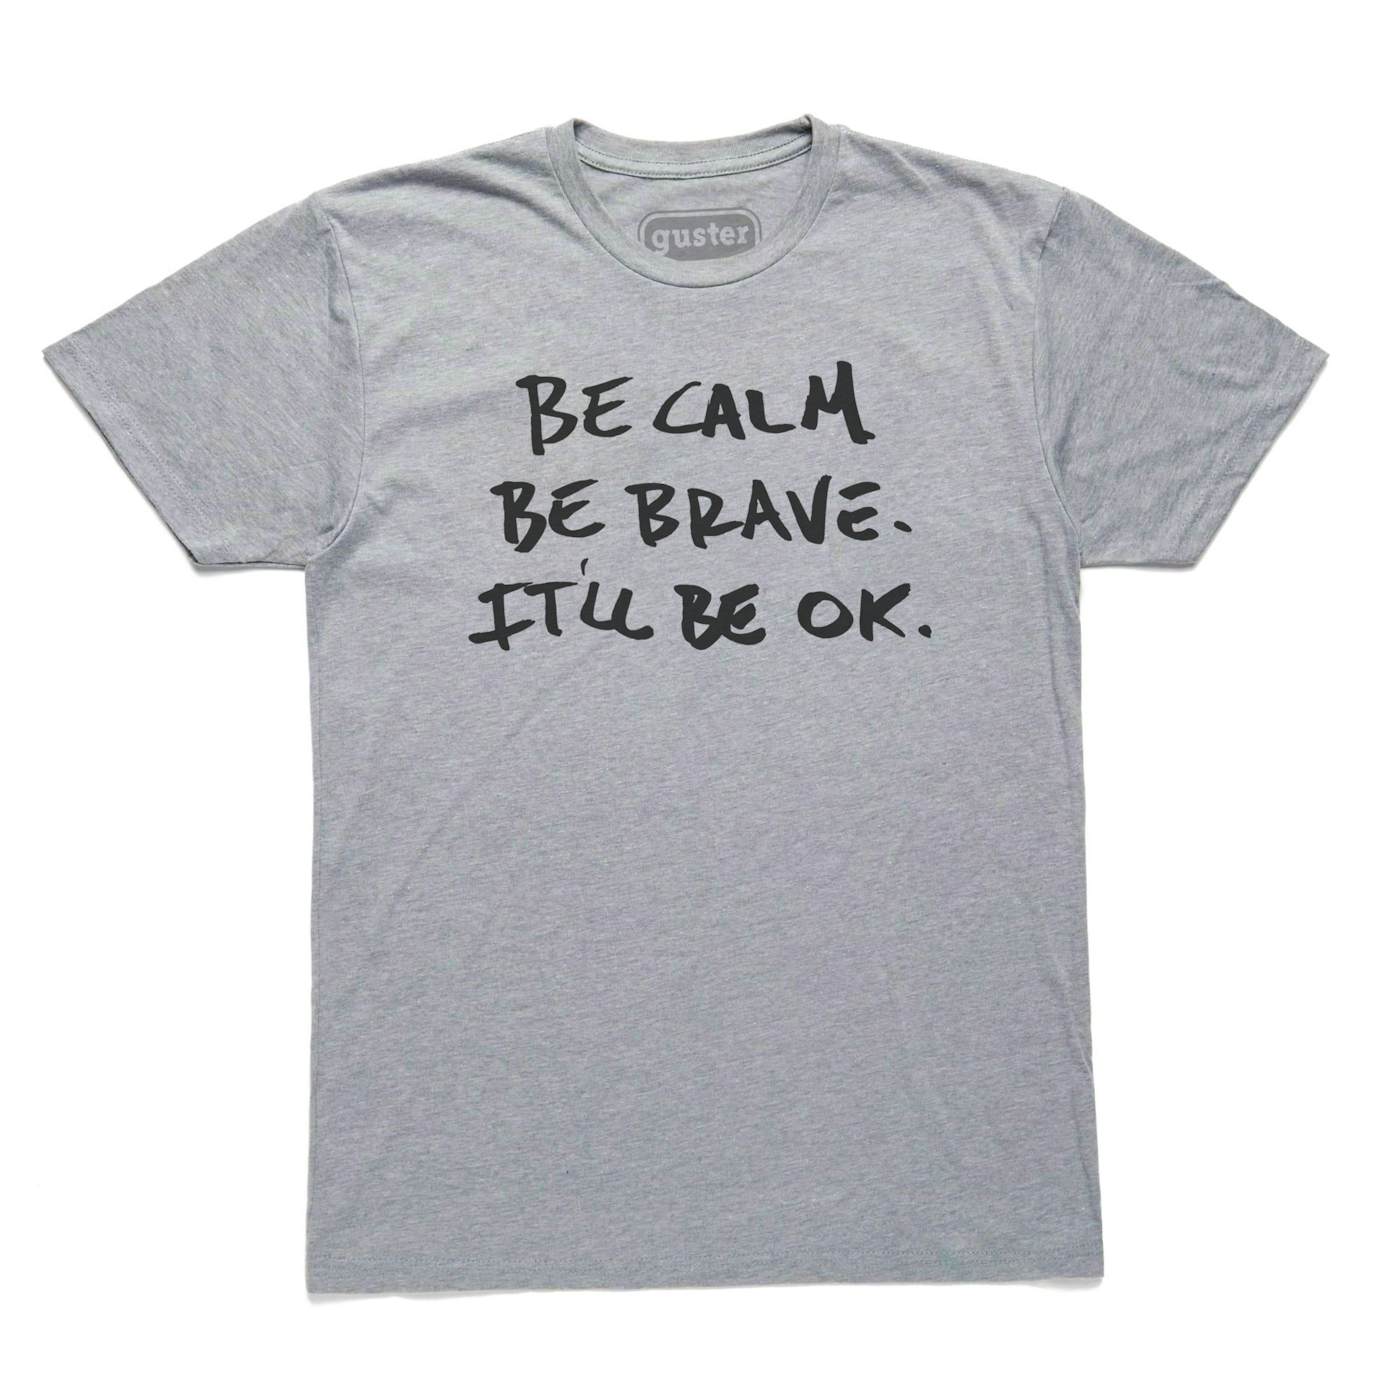 Guster 'Be Calm, Be Brave' T-Shirt